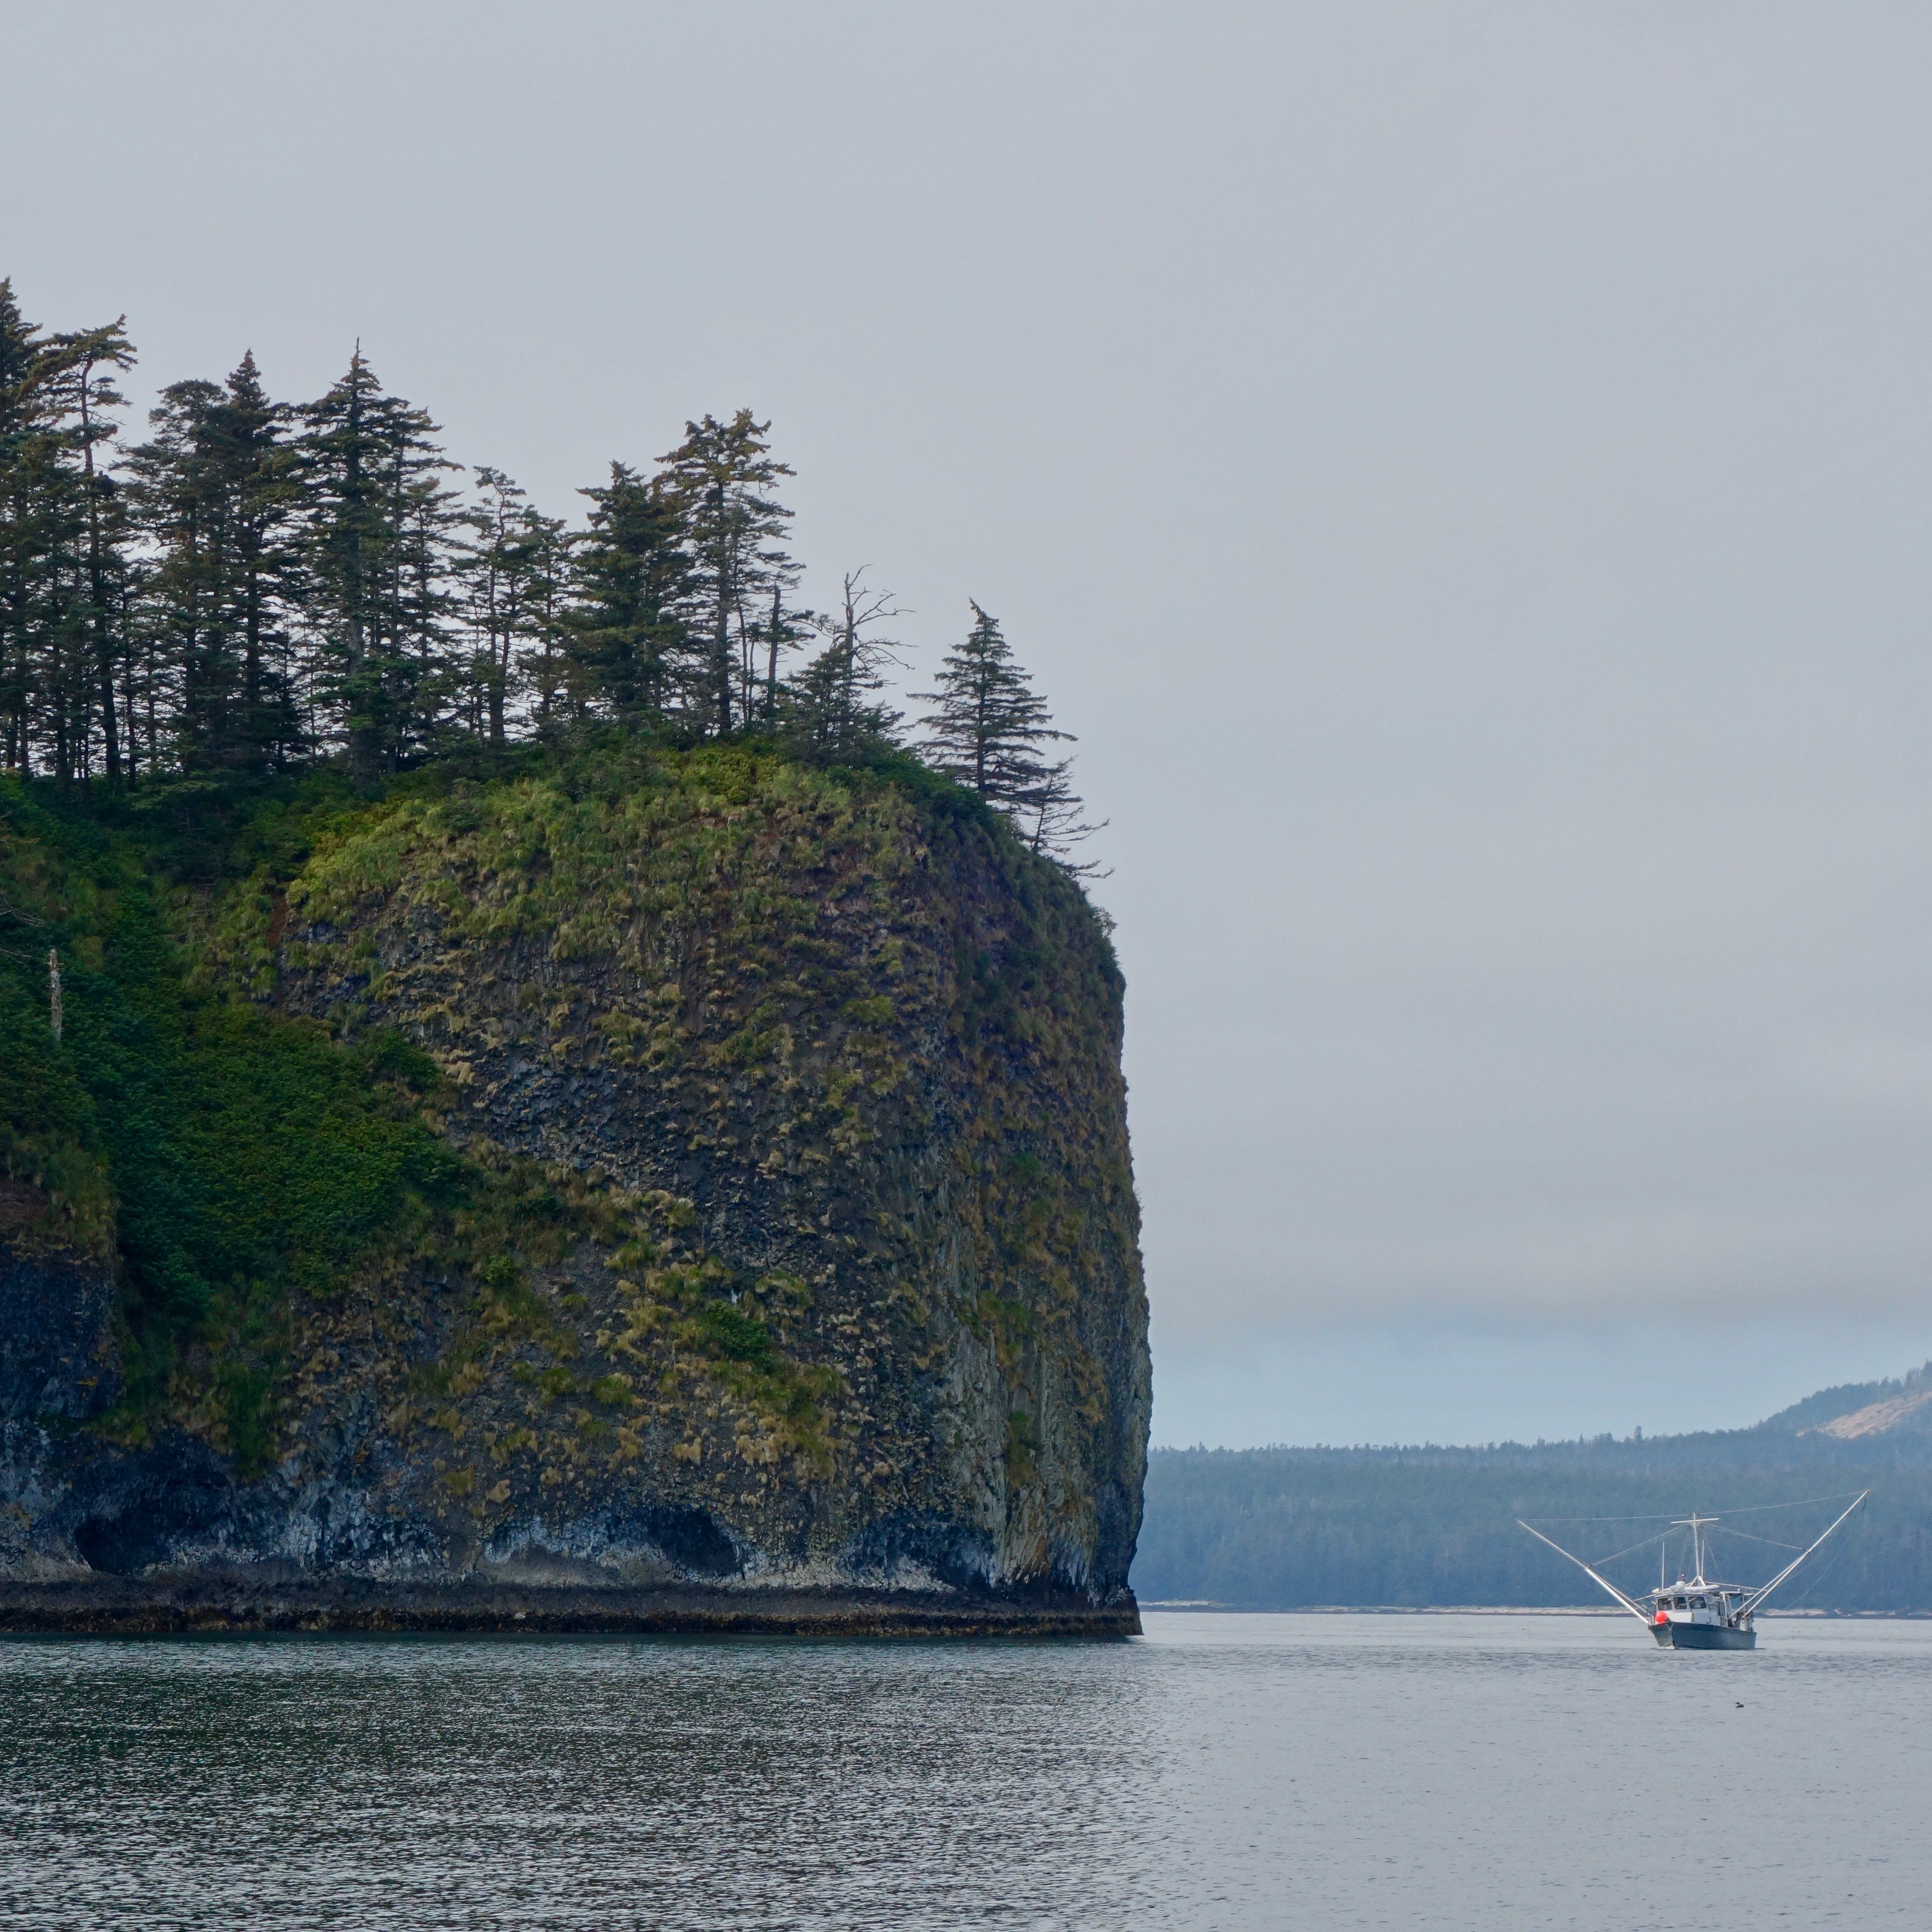 The sharp cliffs of St. Lazaria Wildlife Refuge are impressive.  Humans are not allowed on this island, also known as "Puffin Island."